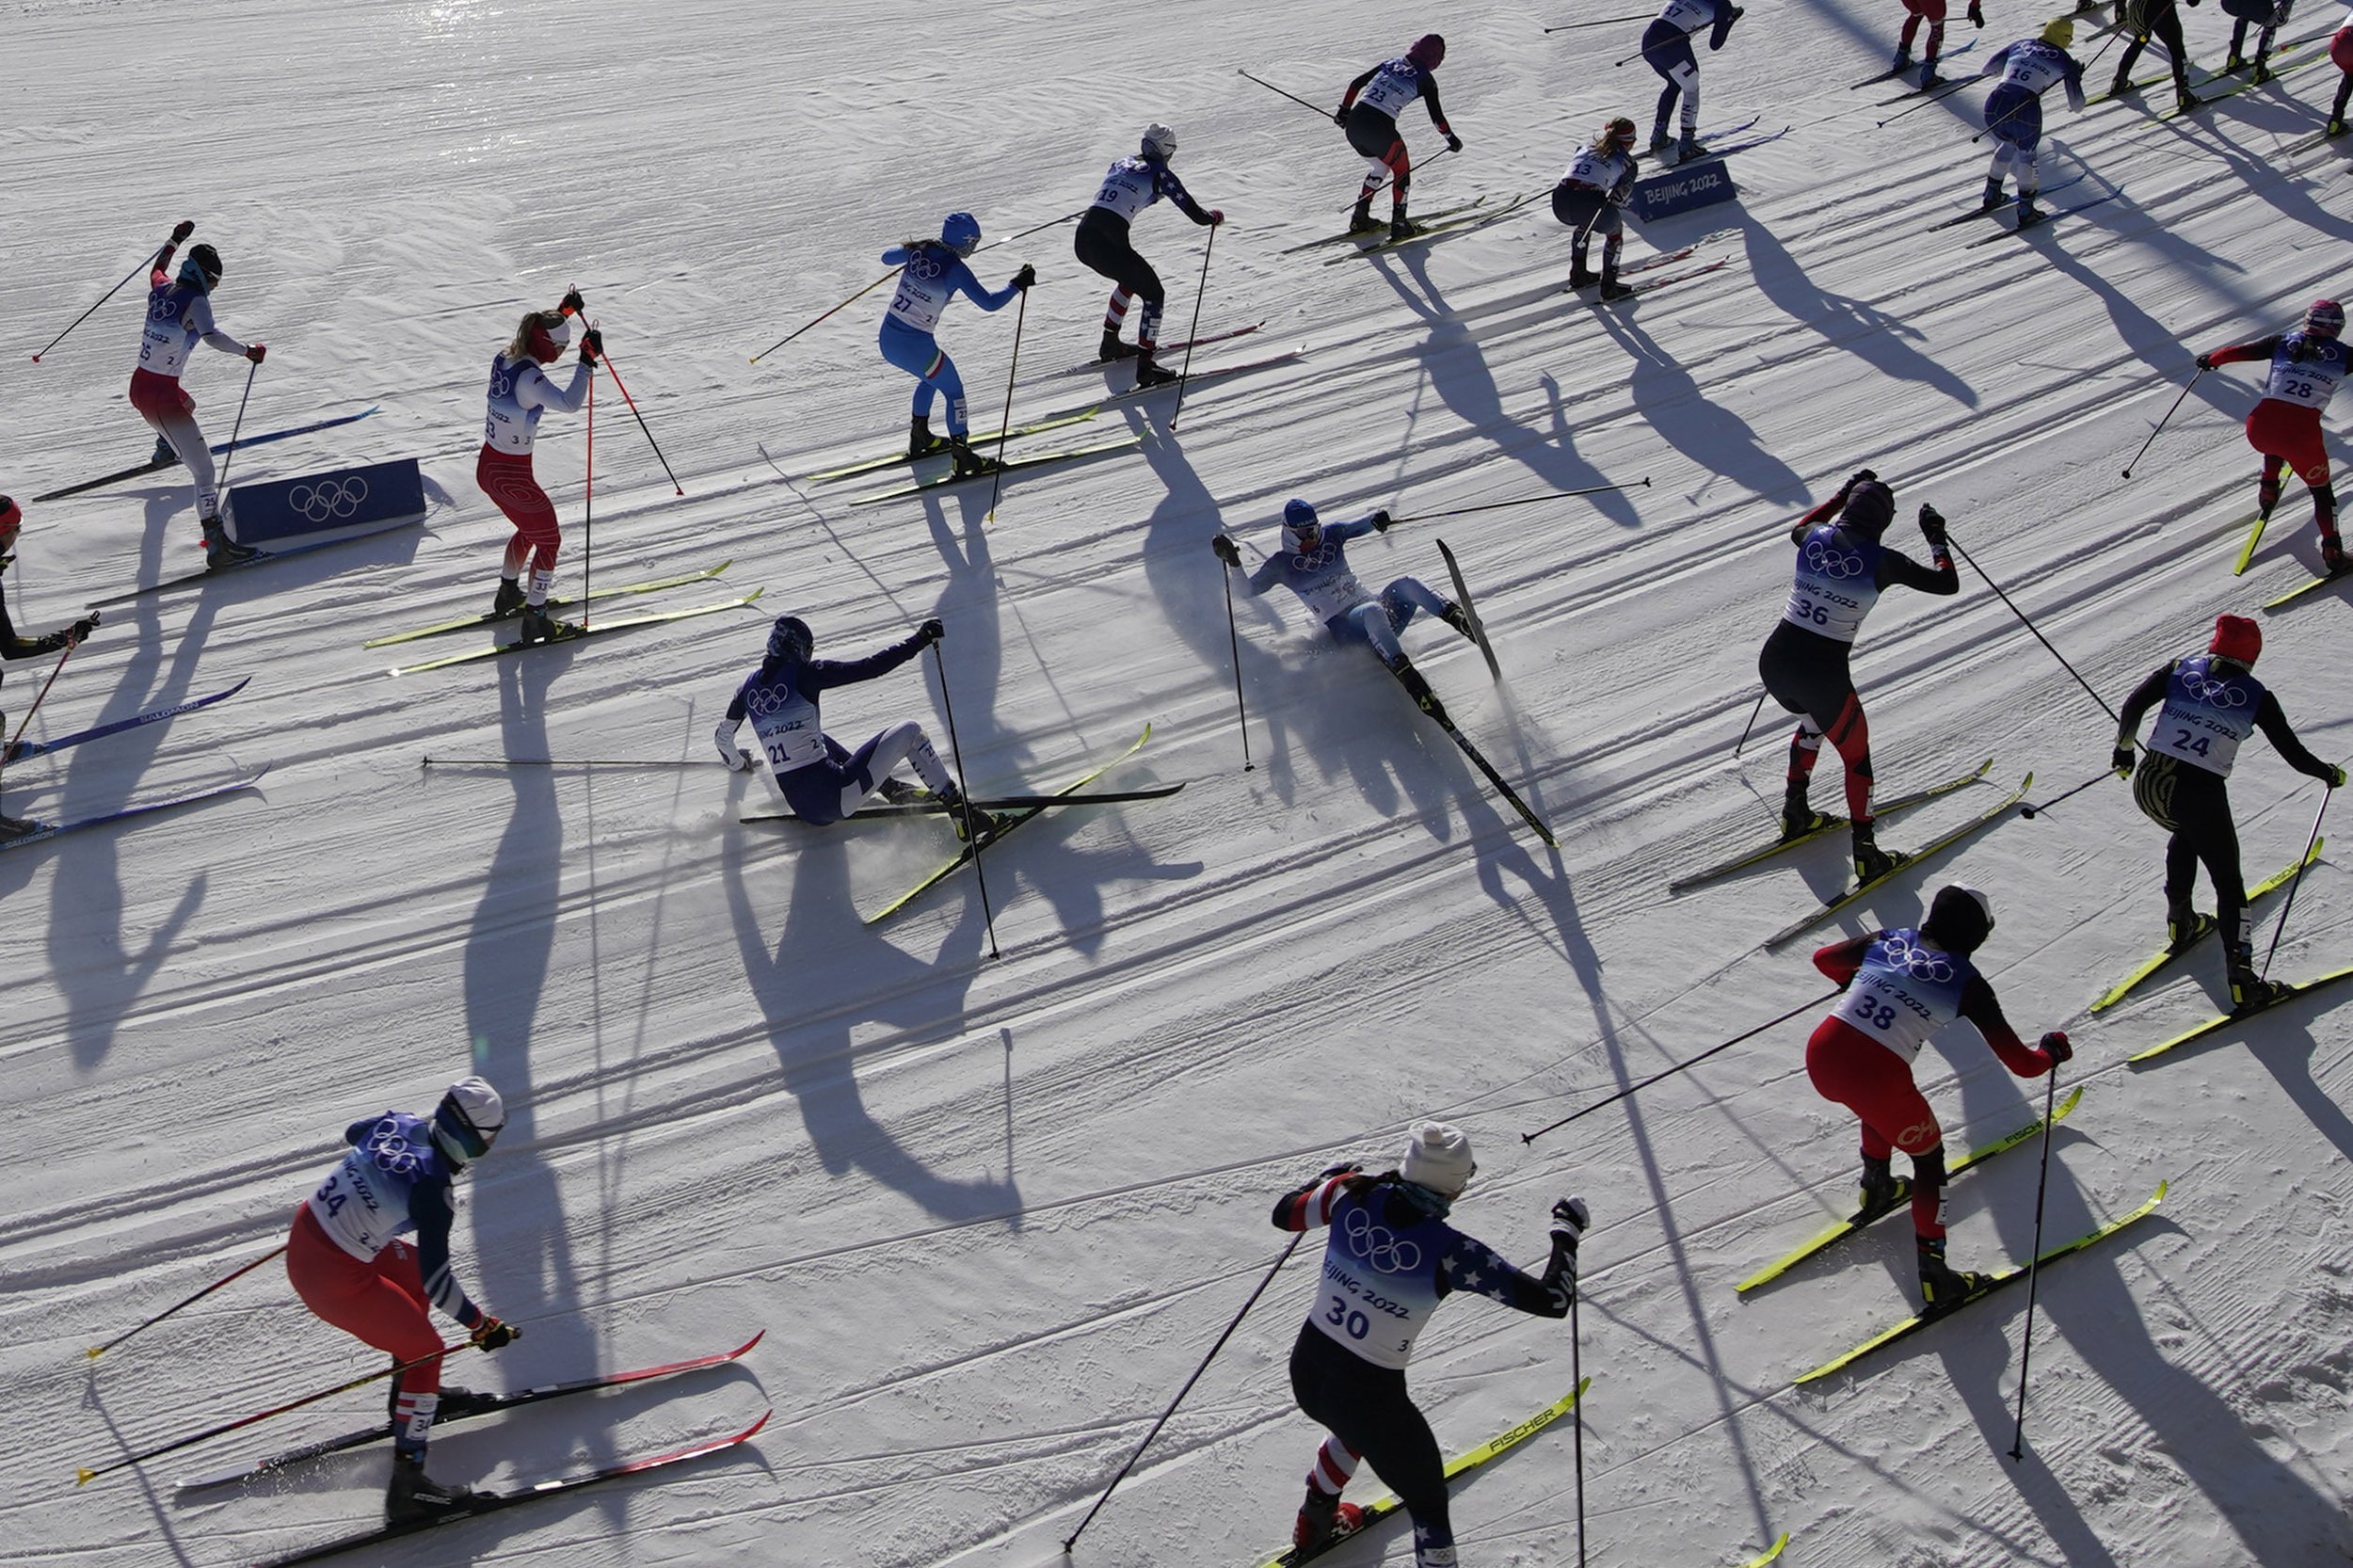  Skiers fall while competing during the women's 7.5km + 7.5km Skiathlon cross-country skiing competition at the 2022 Winter Olympics, Saturday, Feb. 5, 2022, in Zhangjiakou, China. (AP Photo/John Locher) 